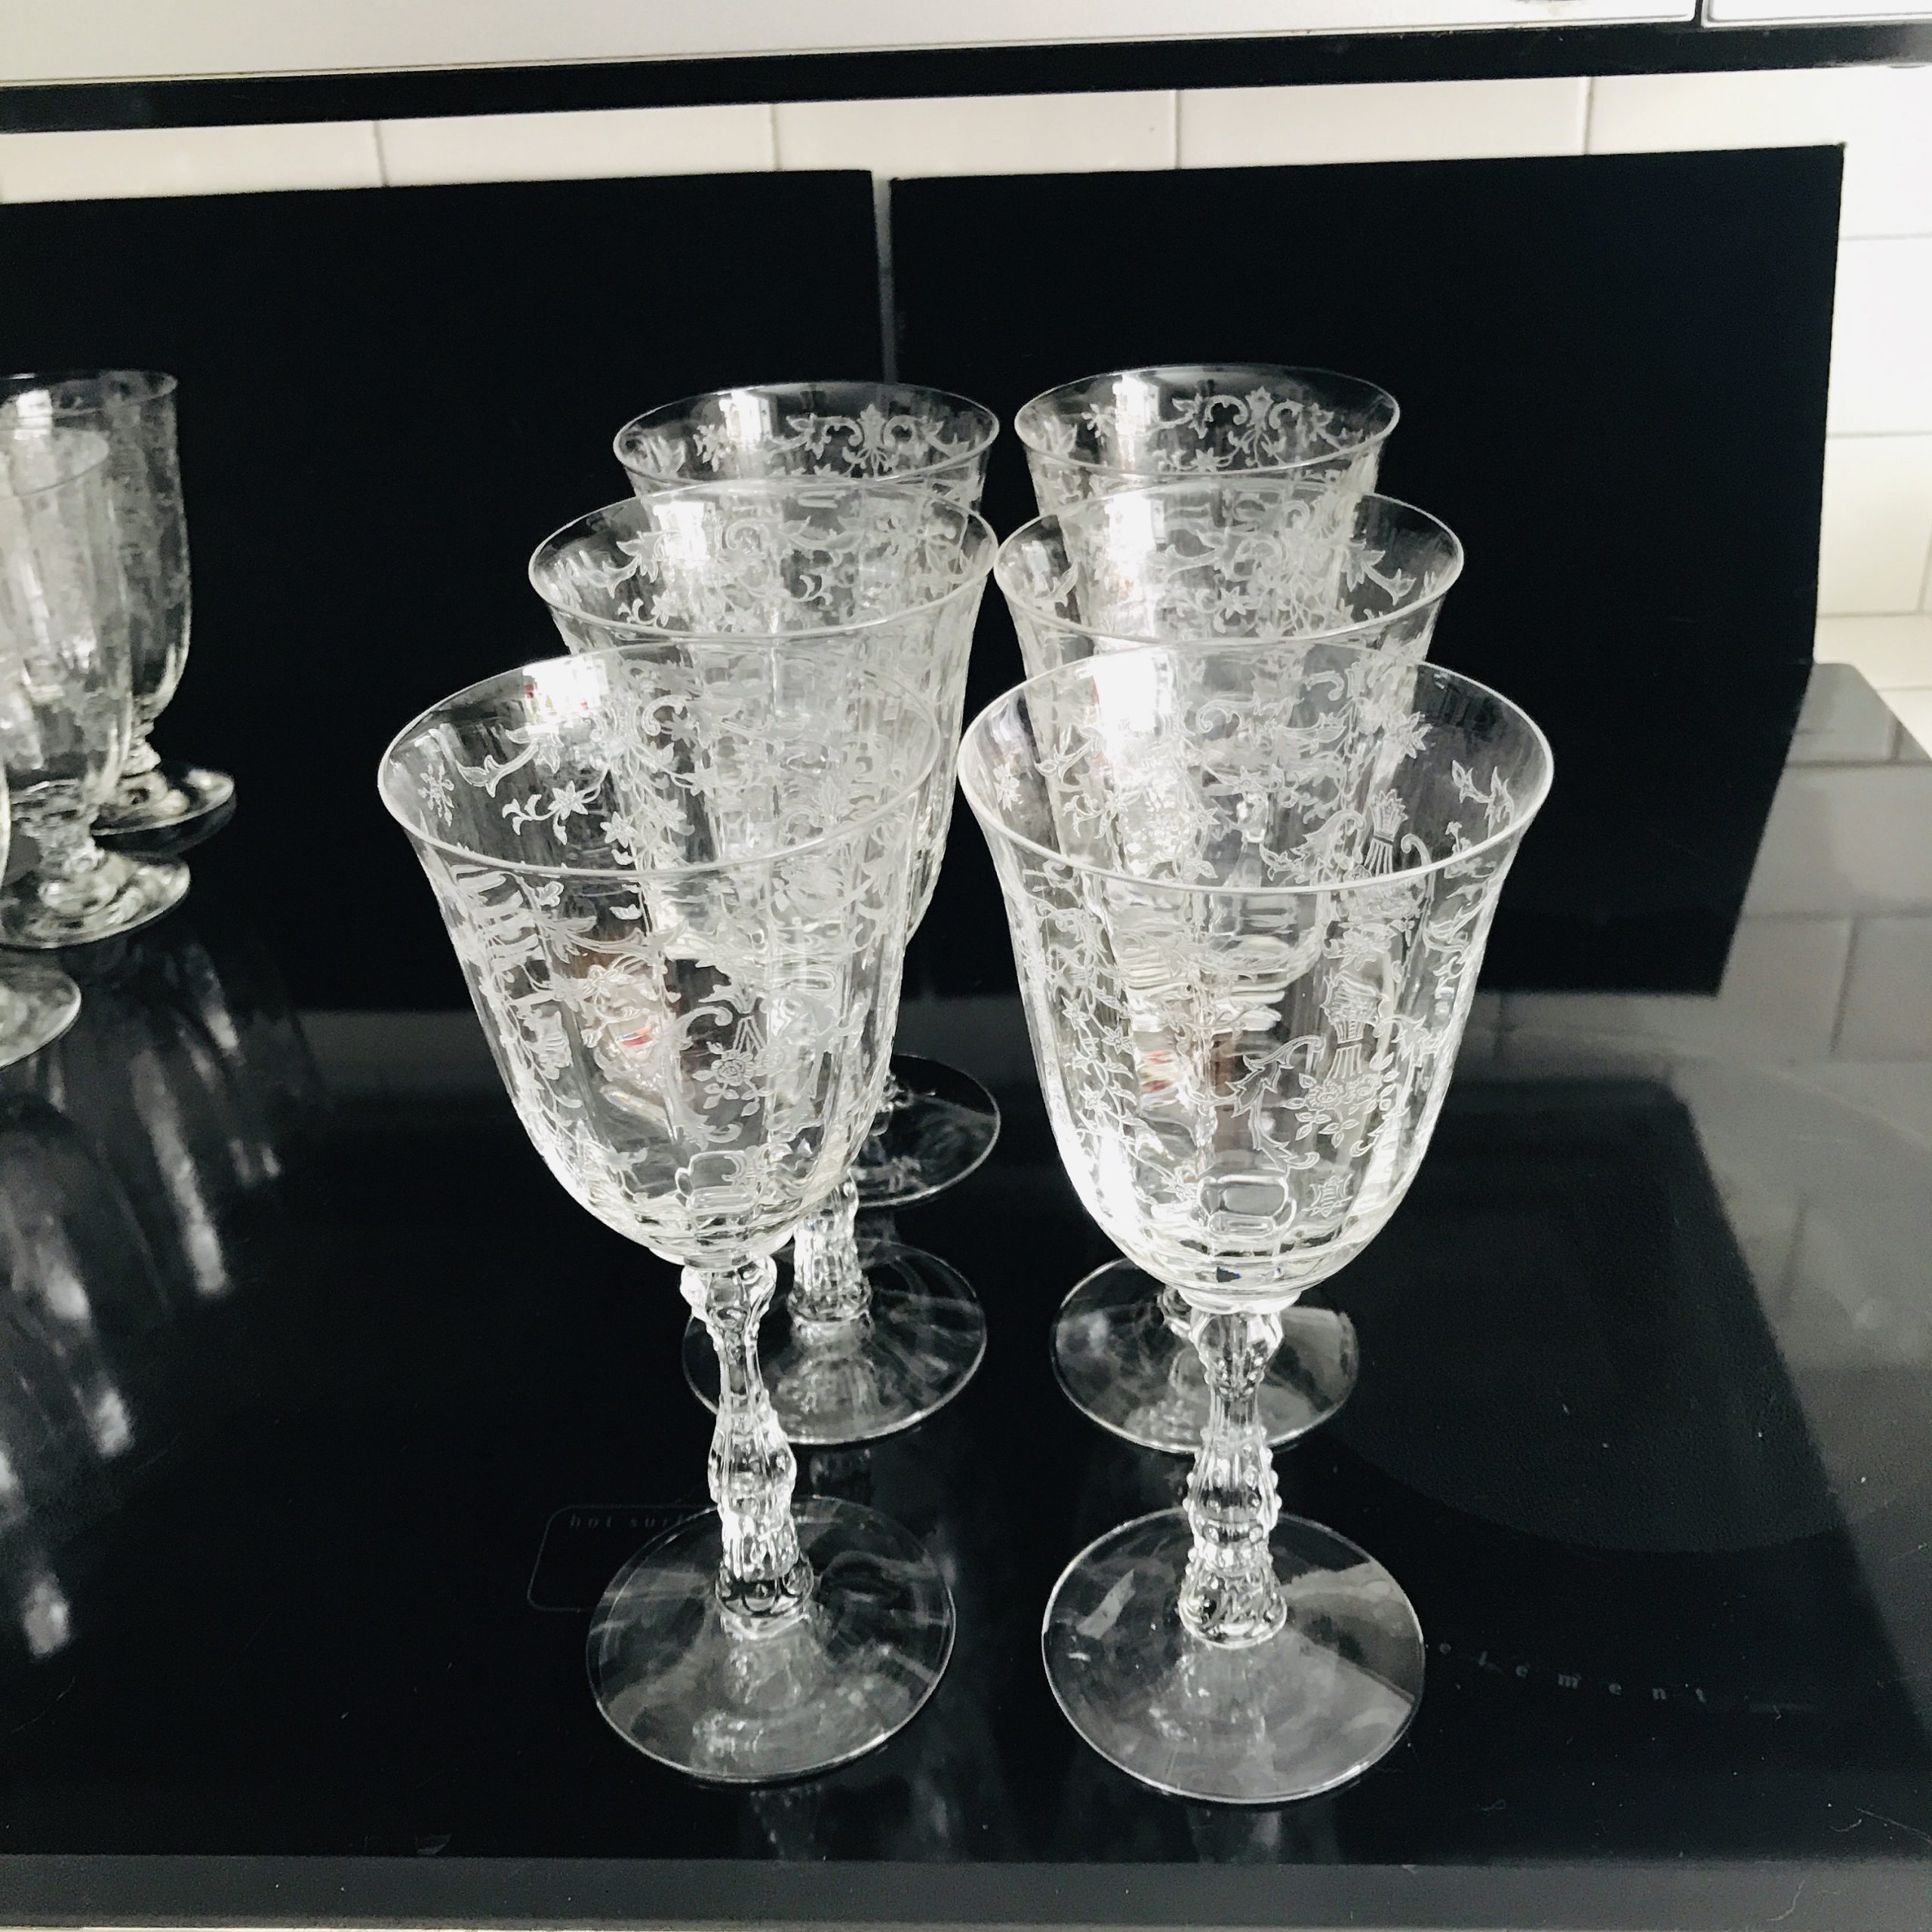 https://www.truevintageantiques.com/wp-content/uploads/2020/06/vintage-6-claret-tall-wine-glasses-fostoria-crystal-navarre-pattern-paneled-and-etched-with-ornate-stem-5ee555315-scaled.jpg